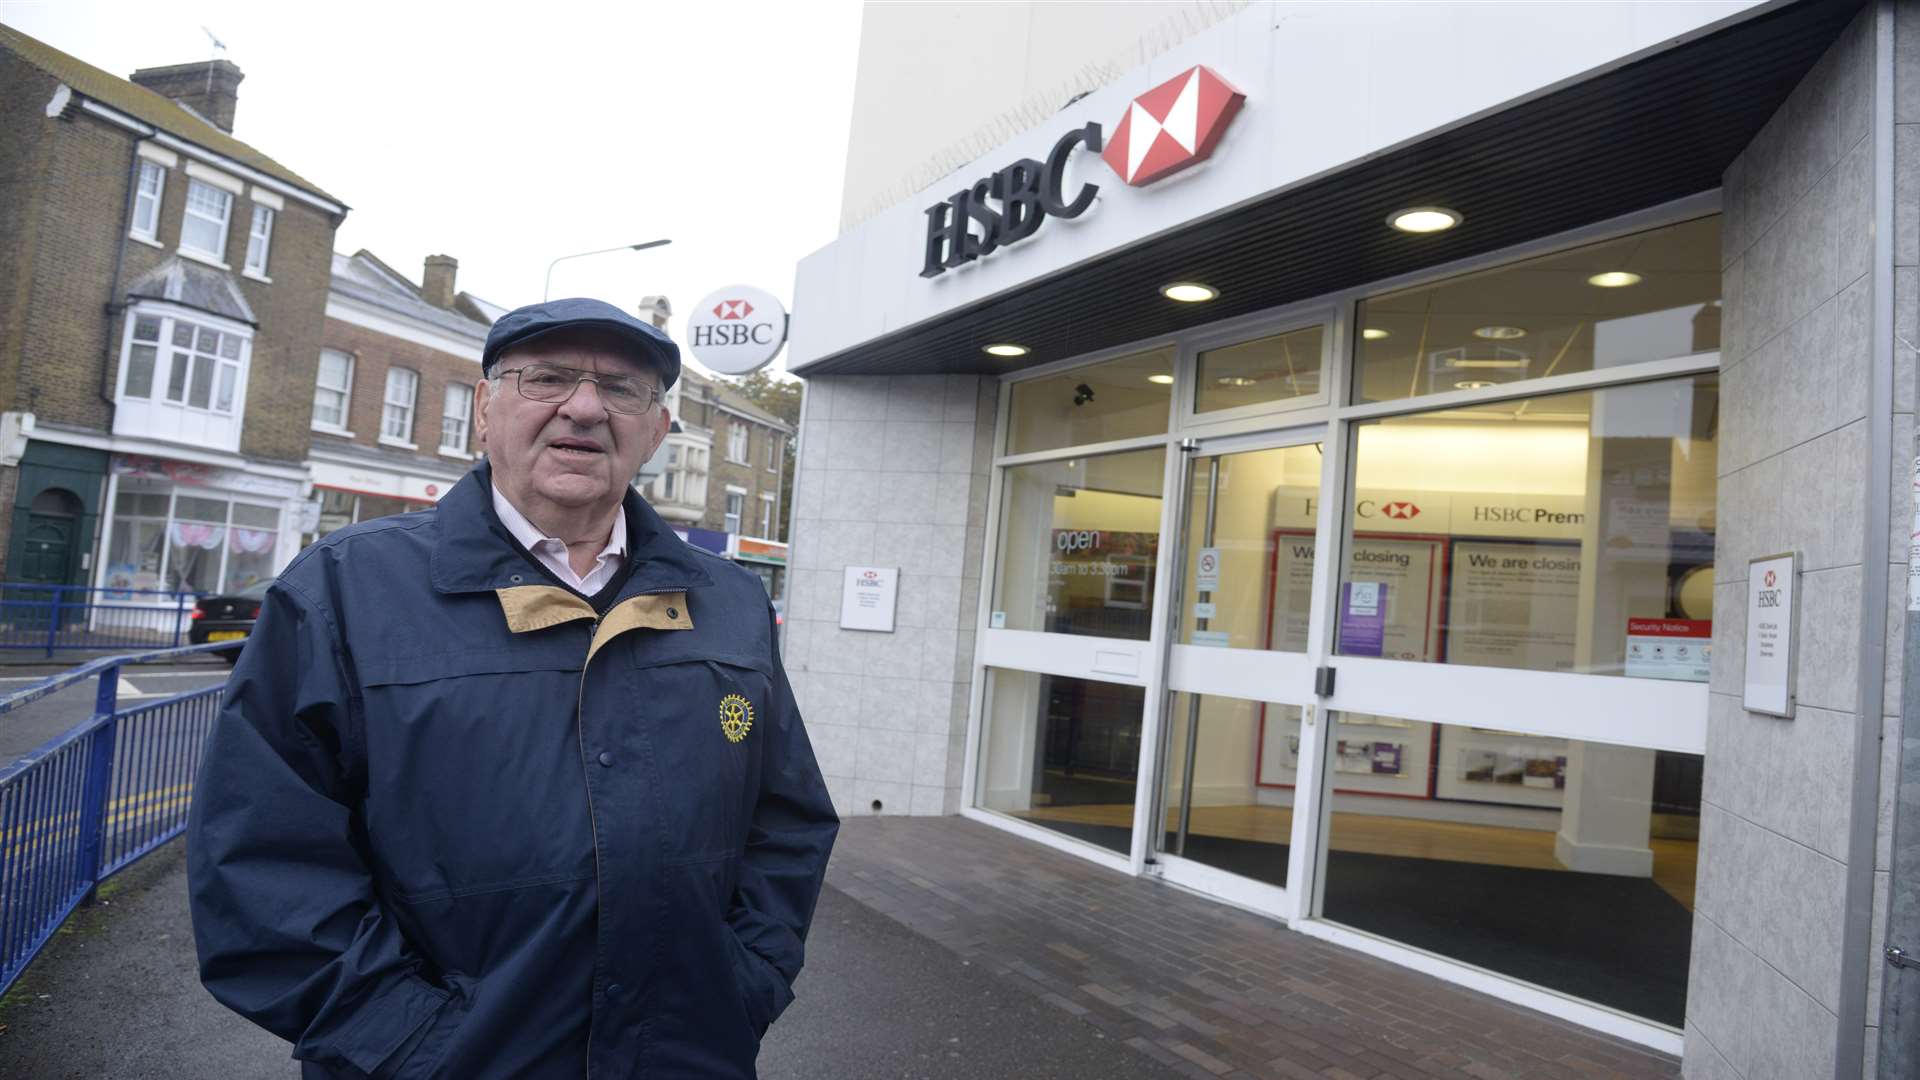 Mike Brown has criticised the closure of Sheerness's branch of HSBC